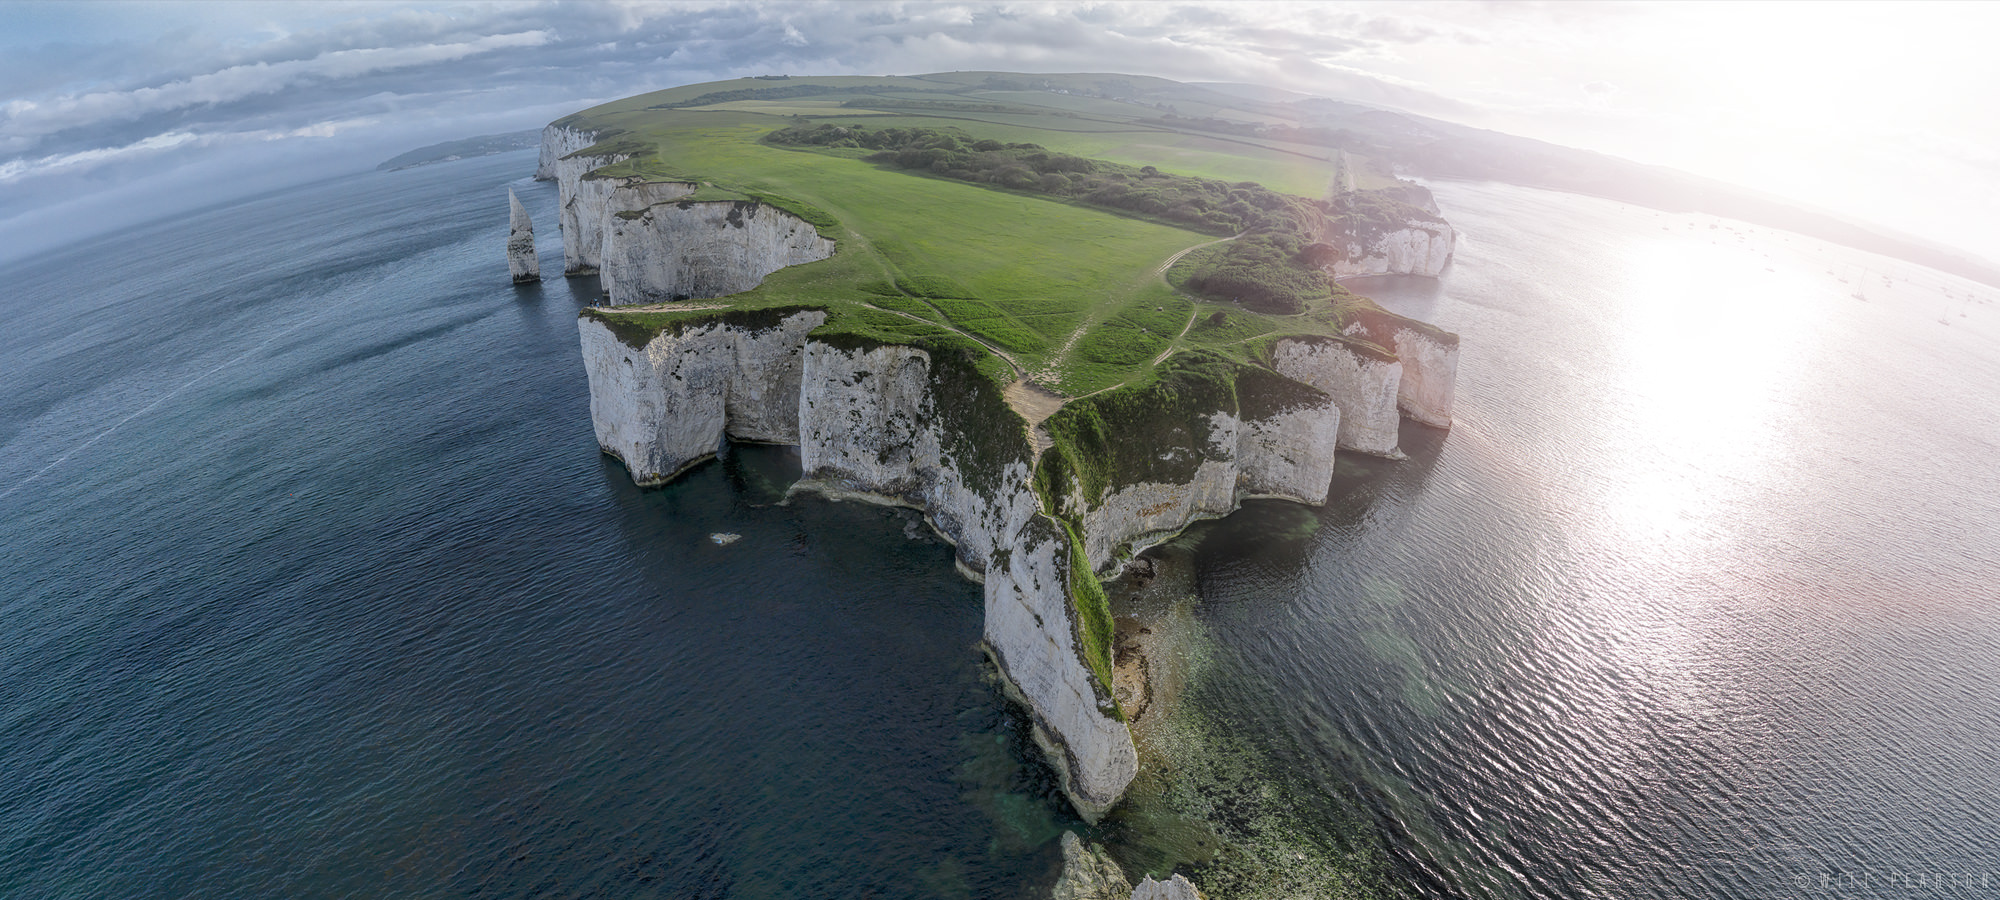 Dorset 360s Old Harry Rocks Aerial 360 Photography